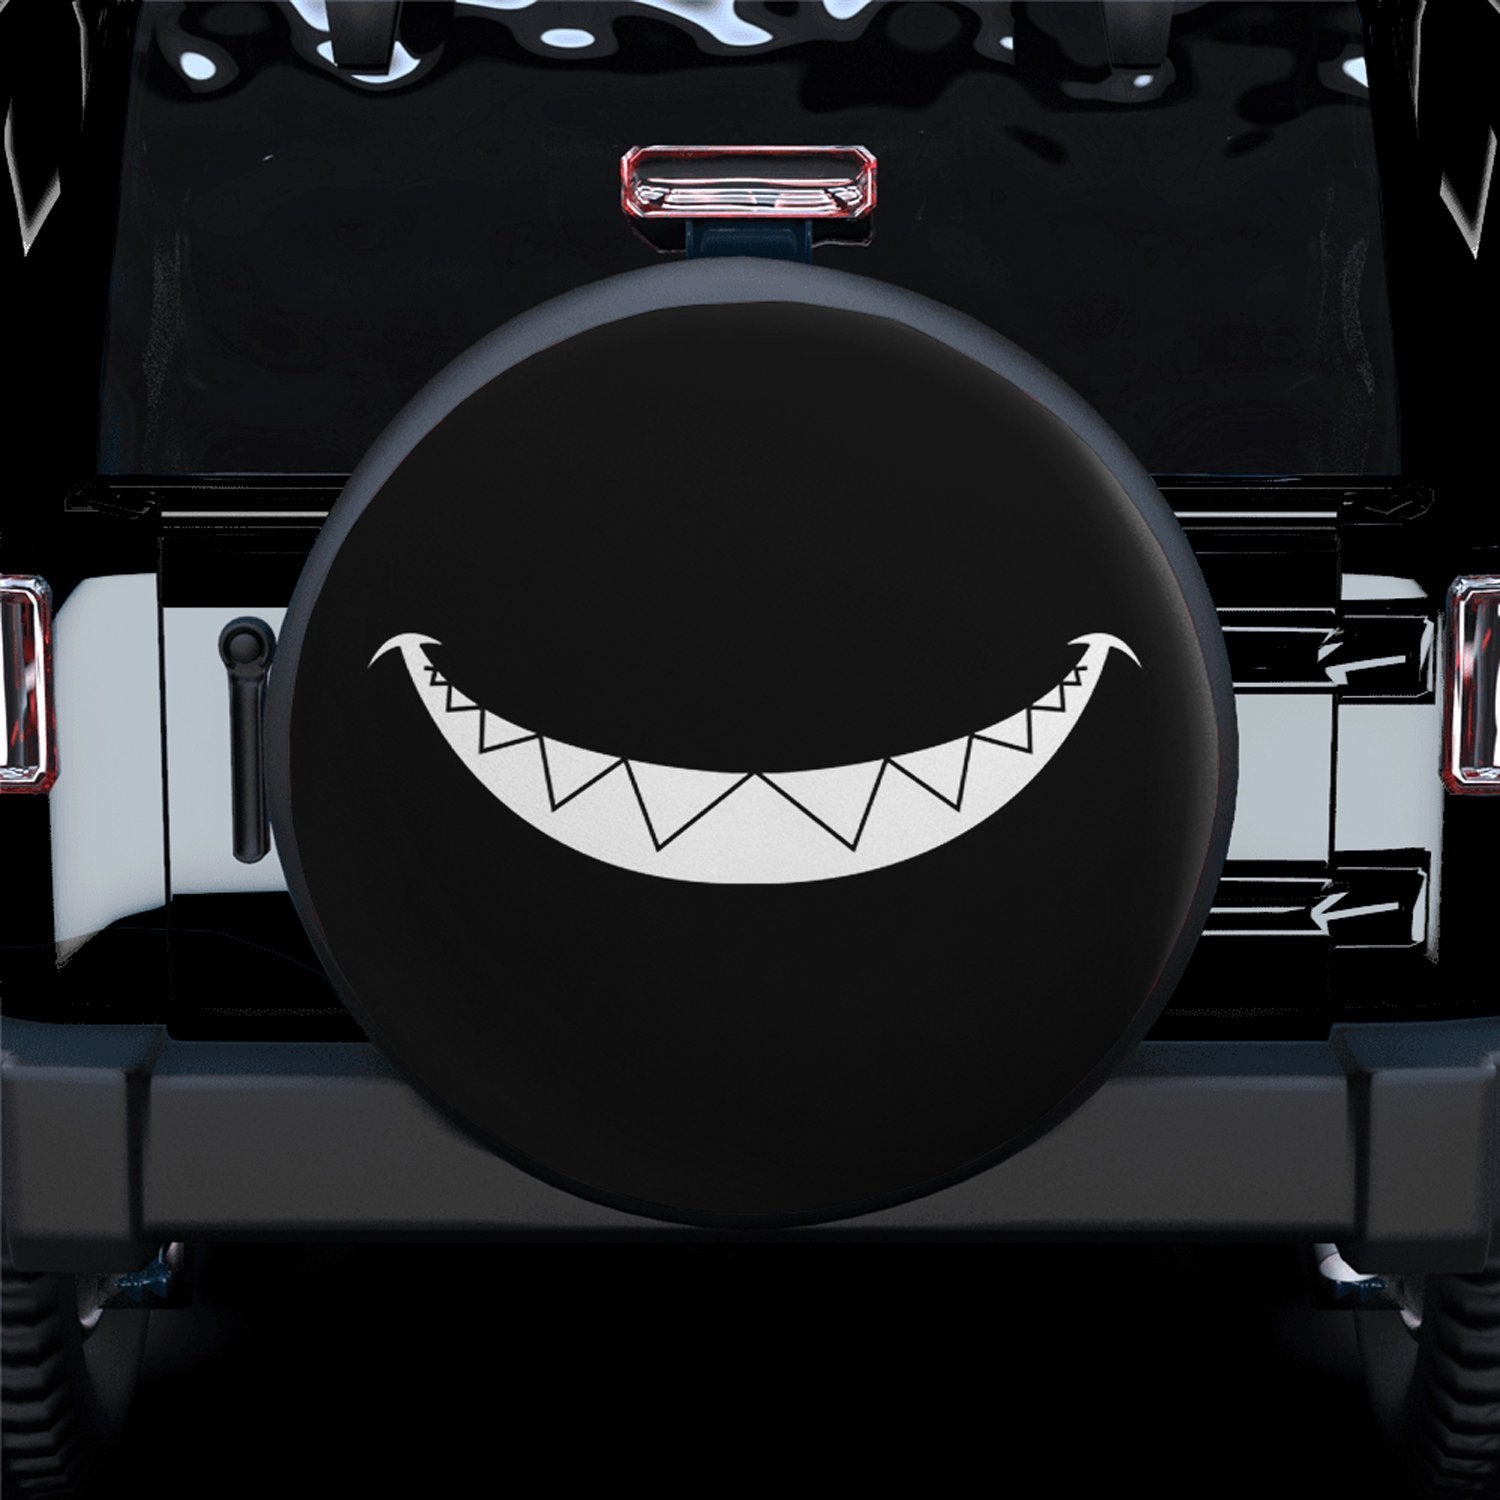 Evil Smile Spare Tire Covers Gift For Campers